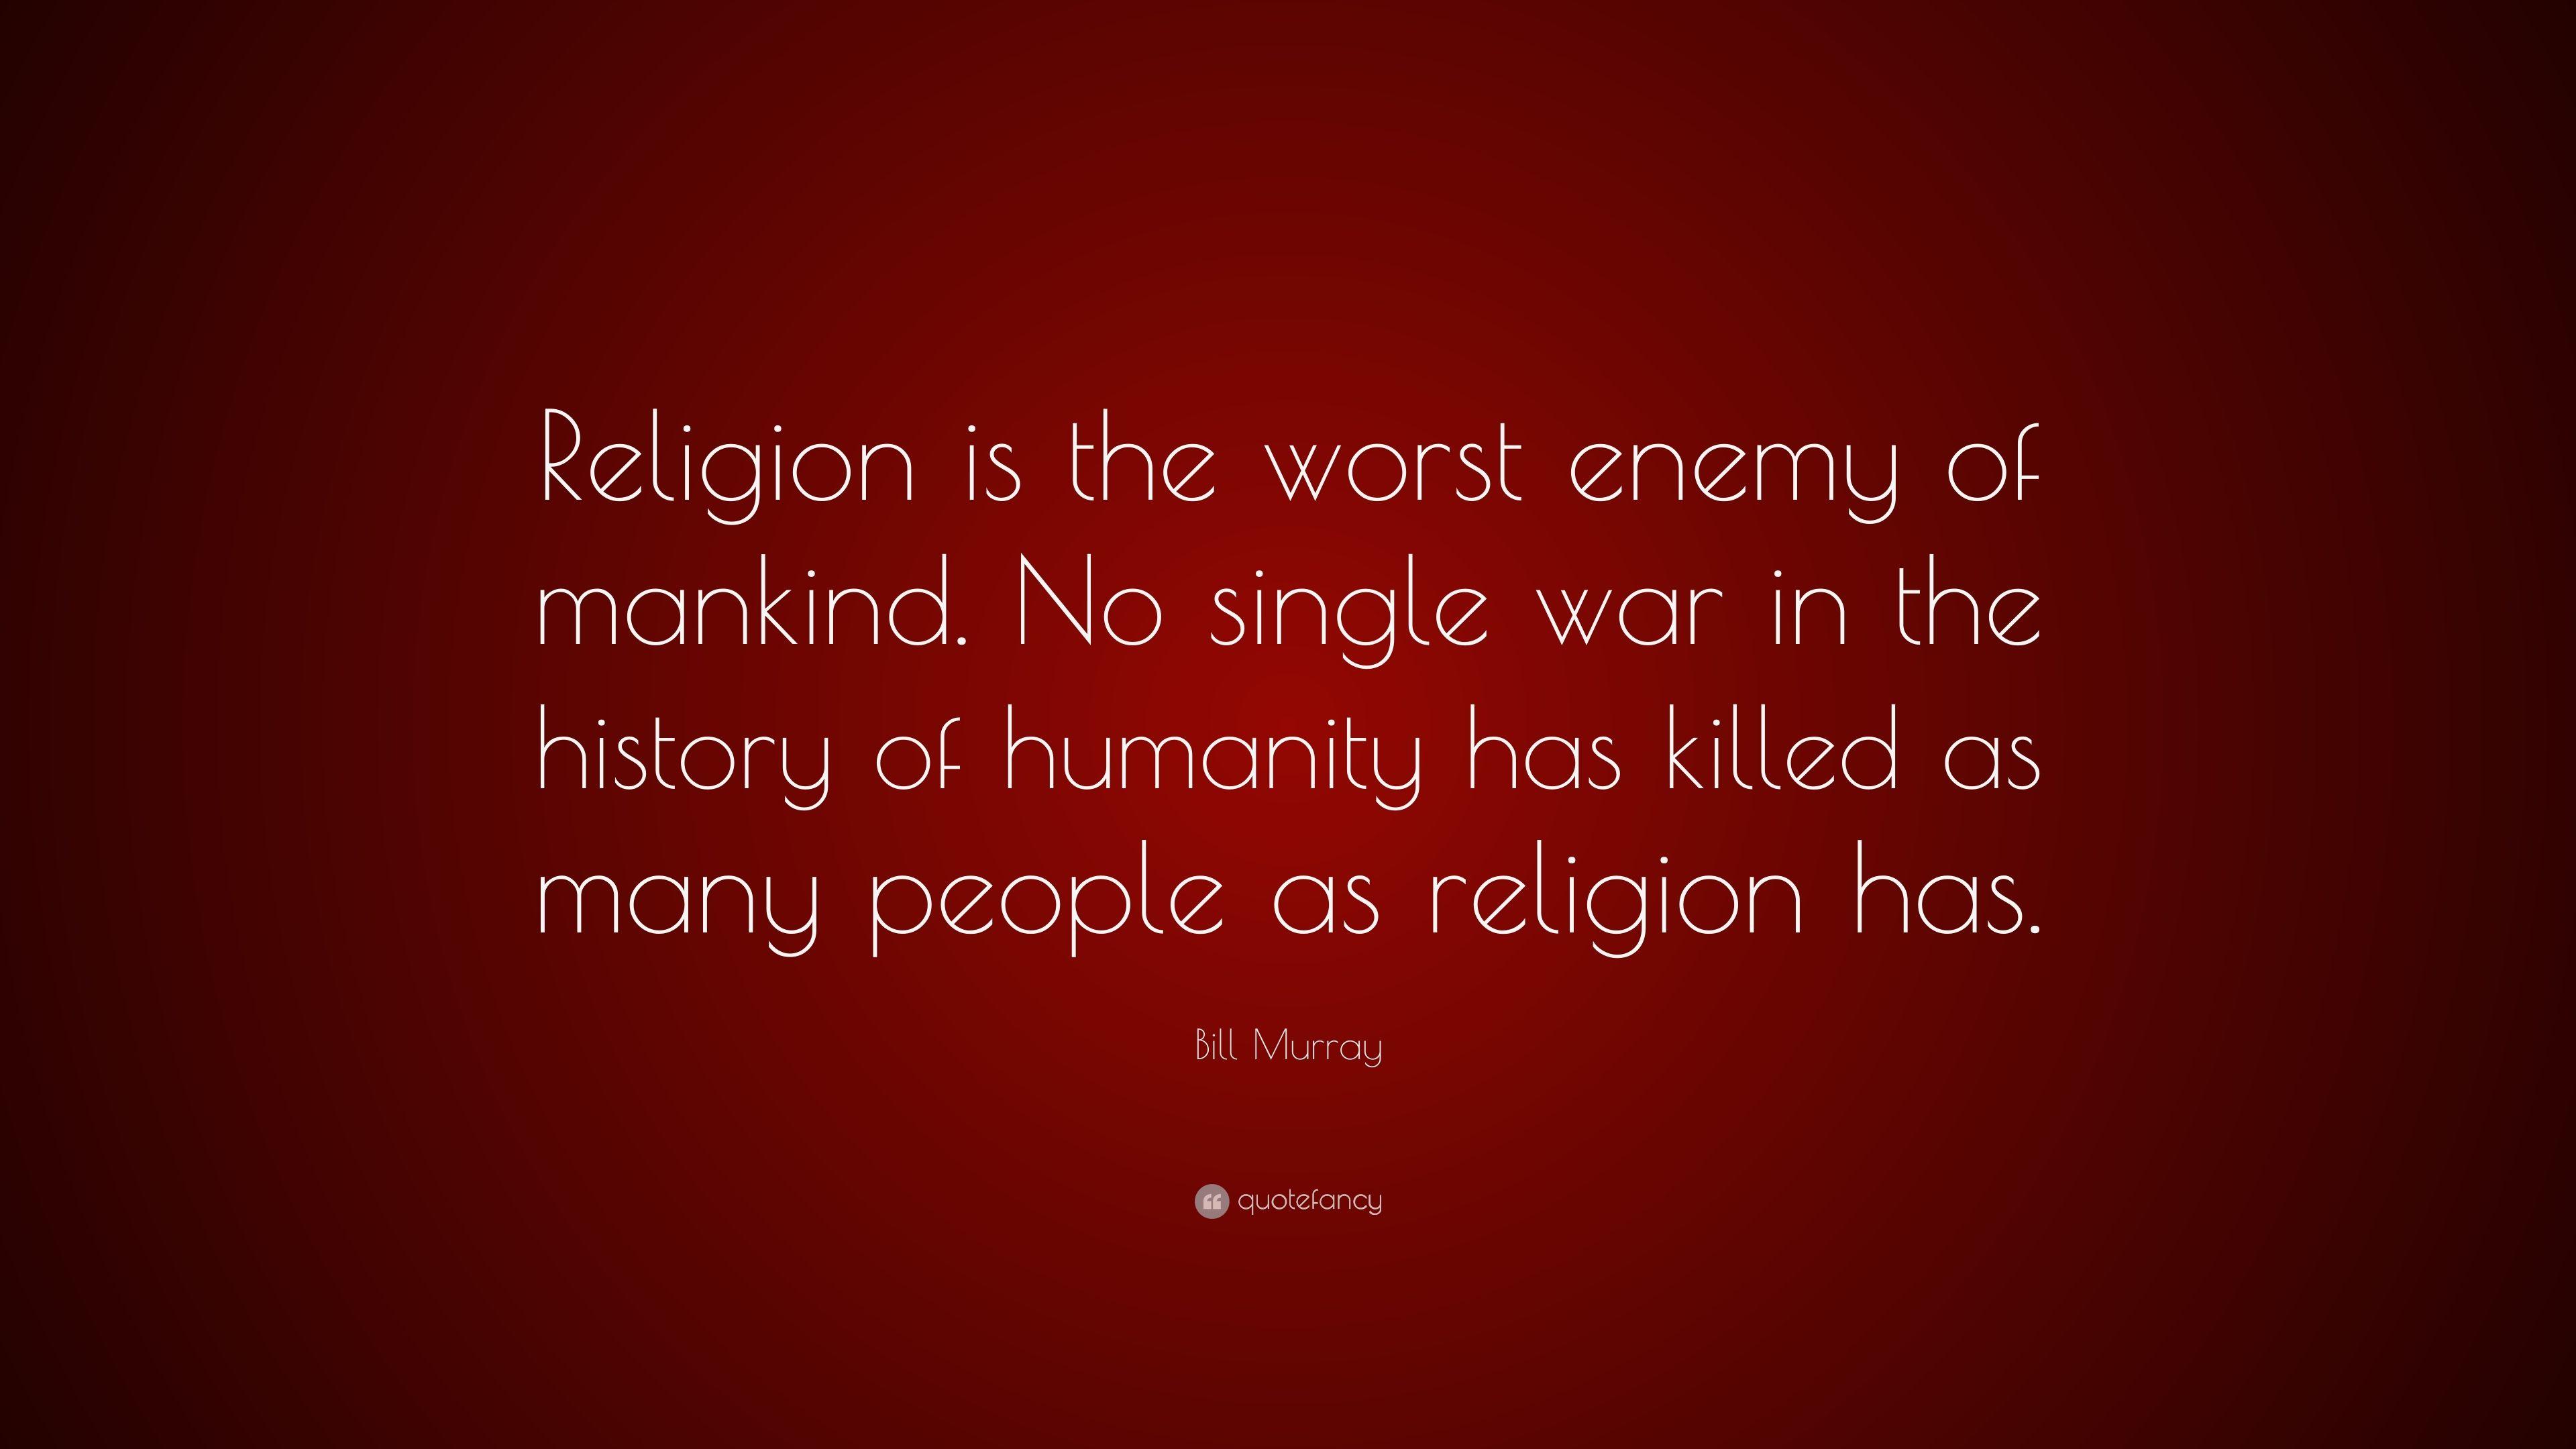 Bill Murray Quote: “Religion is the worst enemy of mankind. No